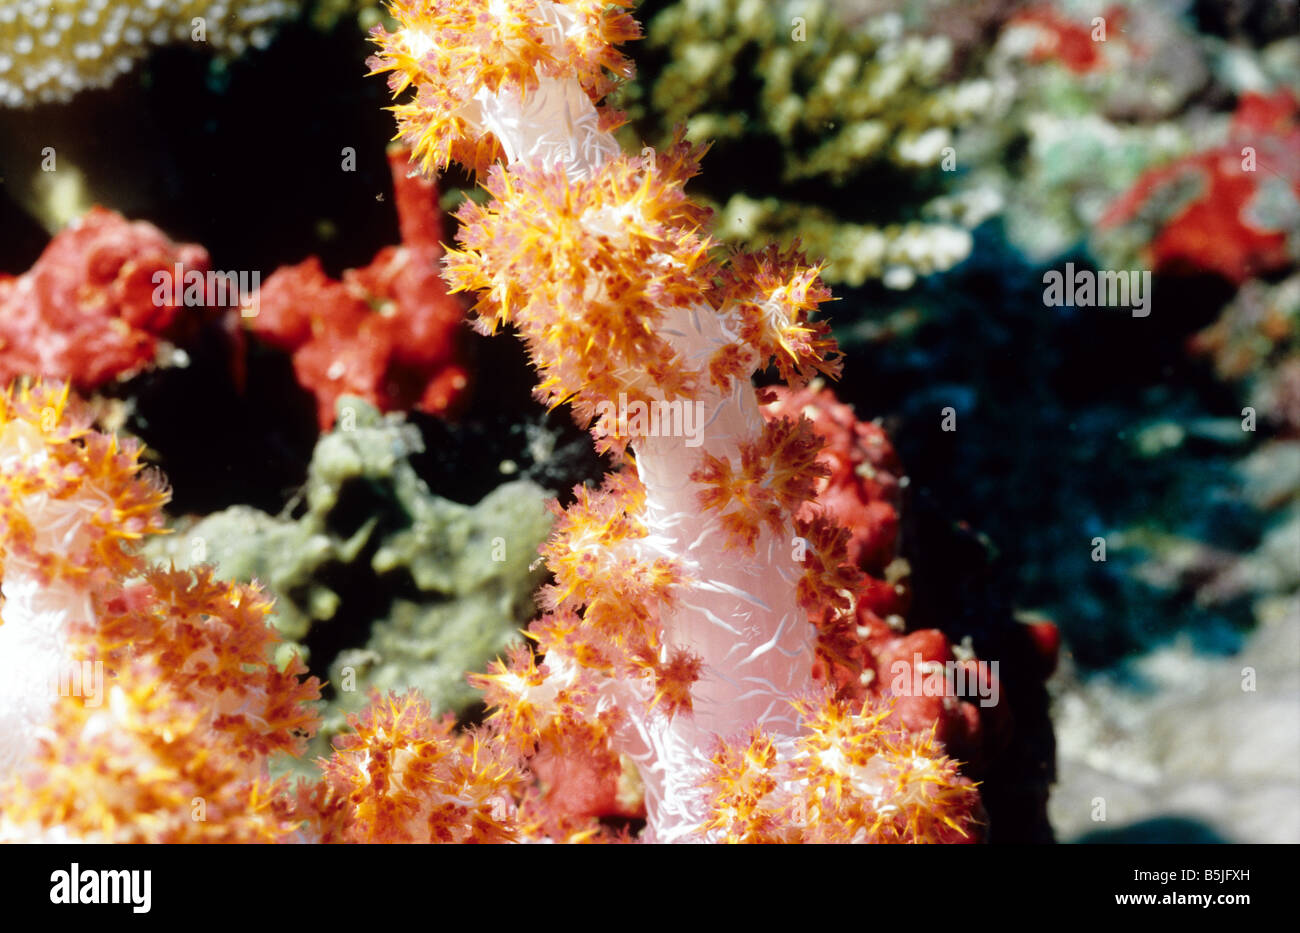 Alcyonaria. Soft Corals. Orange Spiky Soft Coral. Nephtheidae. Dendronephthya sp. Soft Corals of the Maldives. Marine life. Stock Photo